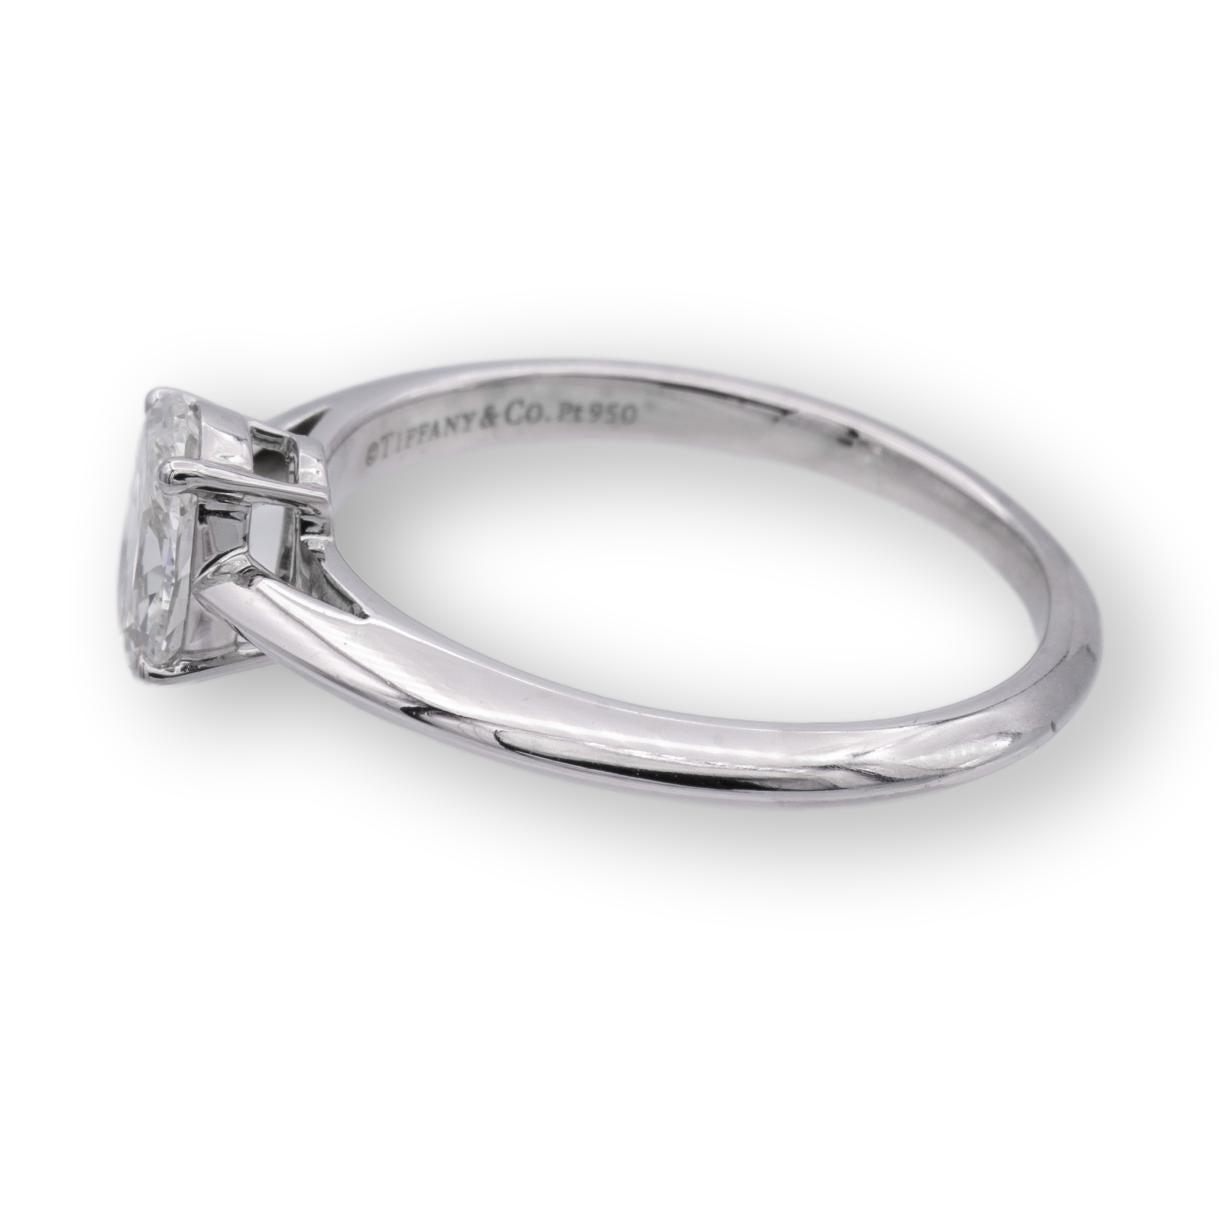 Oval Cut Tiffany & Co. Platinum Oval Diamond Engagement Ring 0.69 Ct E VS1 Excellent Cut